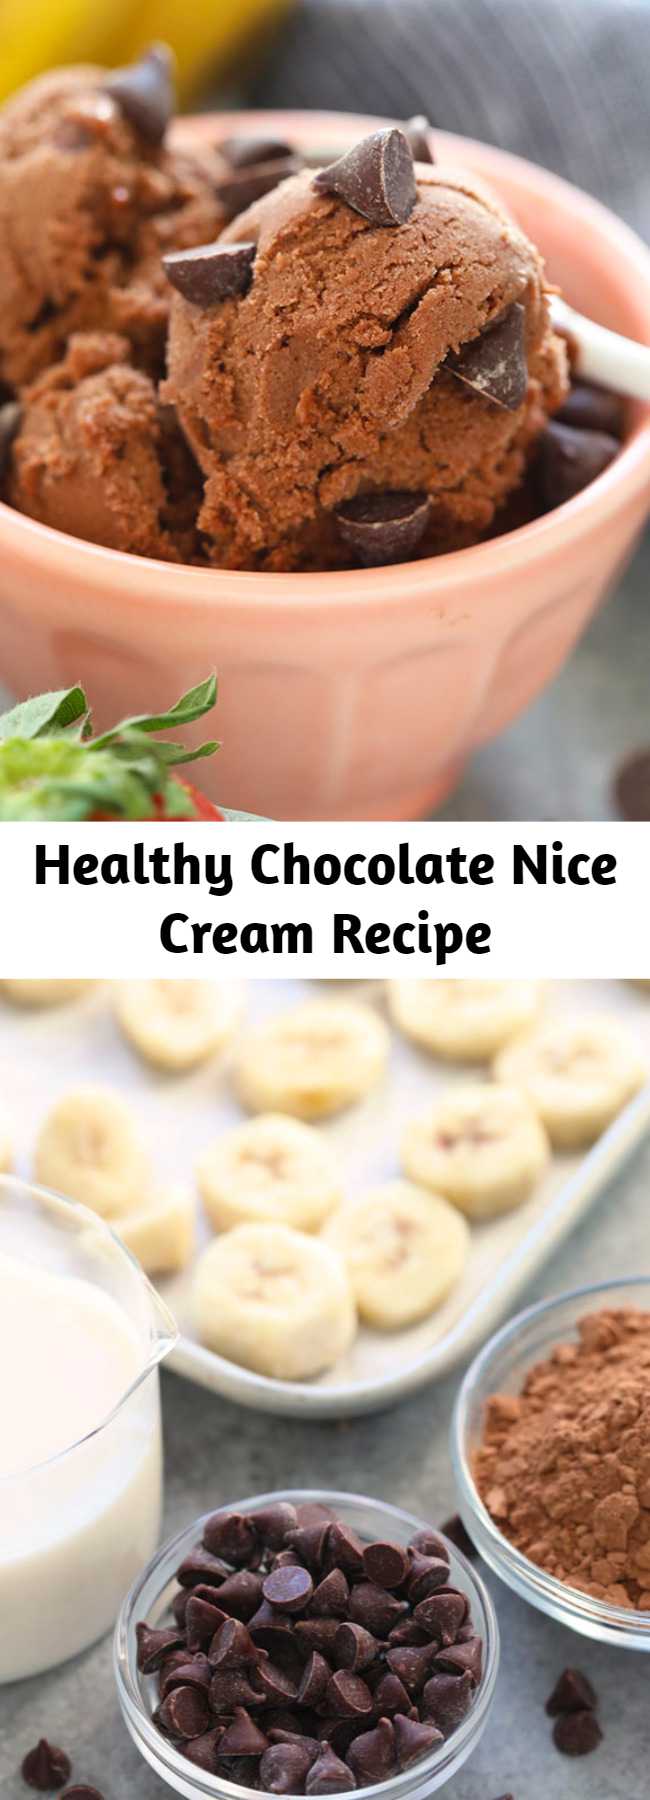 This 4-ingredient Healthy Chocolate Nice Cream boasts the same creamy deliciousness of traditional chocolate ice cream without all those fillers. Plus, it’s dairy free, vegan, and ready to eat in less than 10 minutes. Dessert is served! #nicecream #vegan #recipe #dessert #vegandessert #chocolate